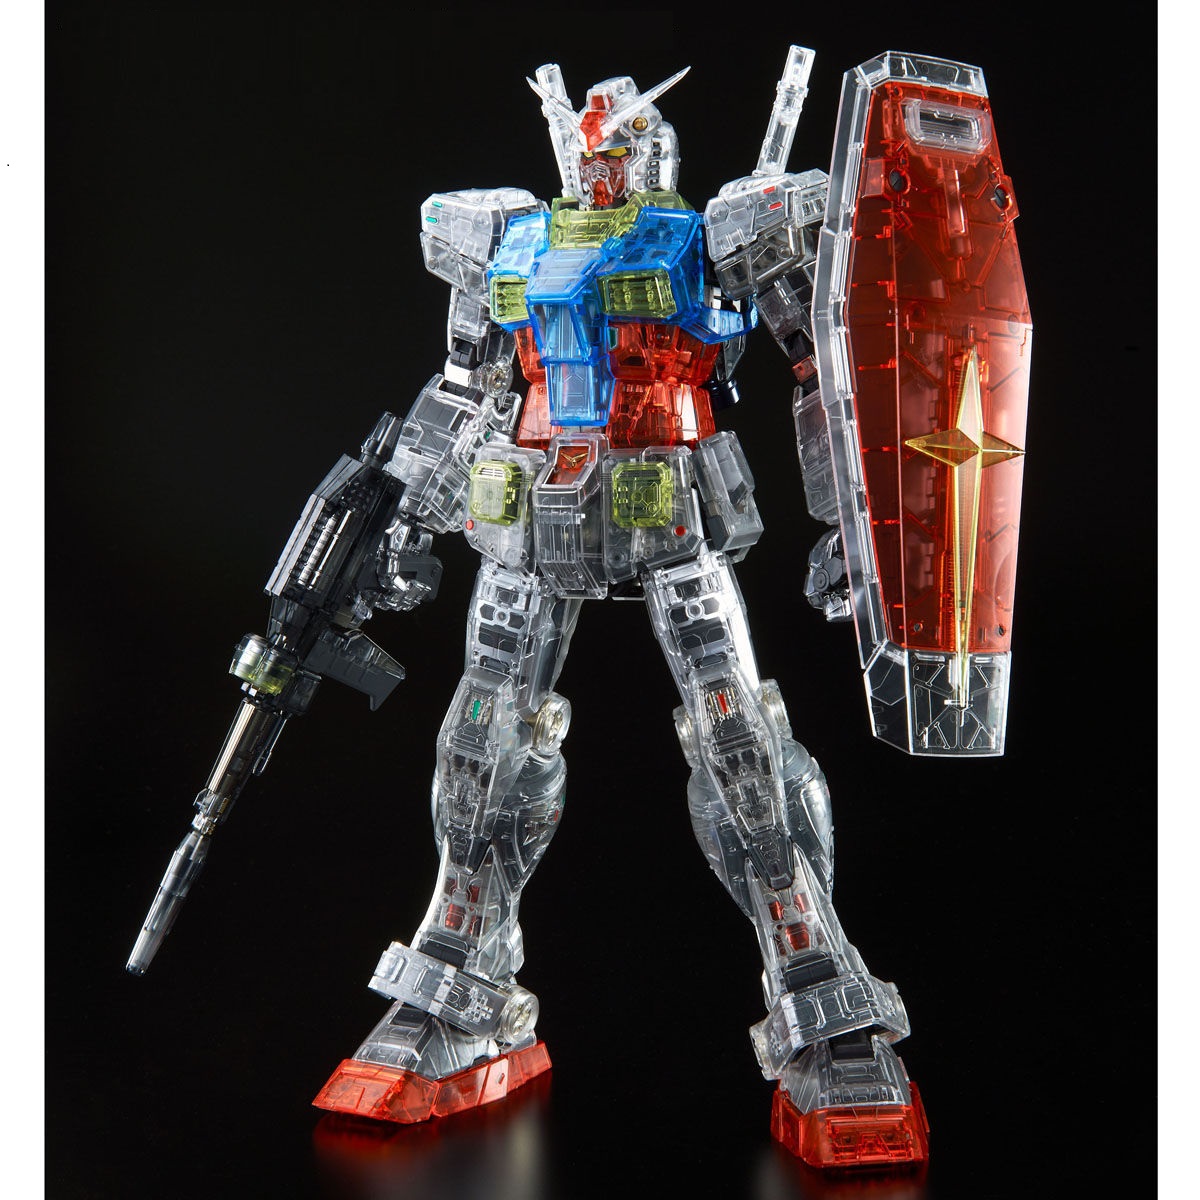 PG UNLEASHED 1⁄60 CLEAR COLOR BODY FOR RX-78-2 GUNDAM | GUNDAM | PREMIUM  BANDAI USA Online Store for Action Figures, Model Kits, Toys and more